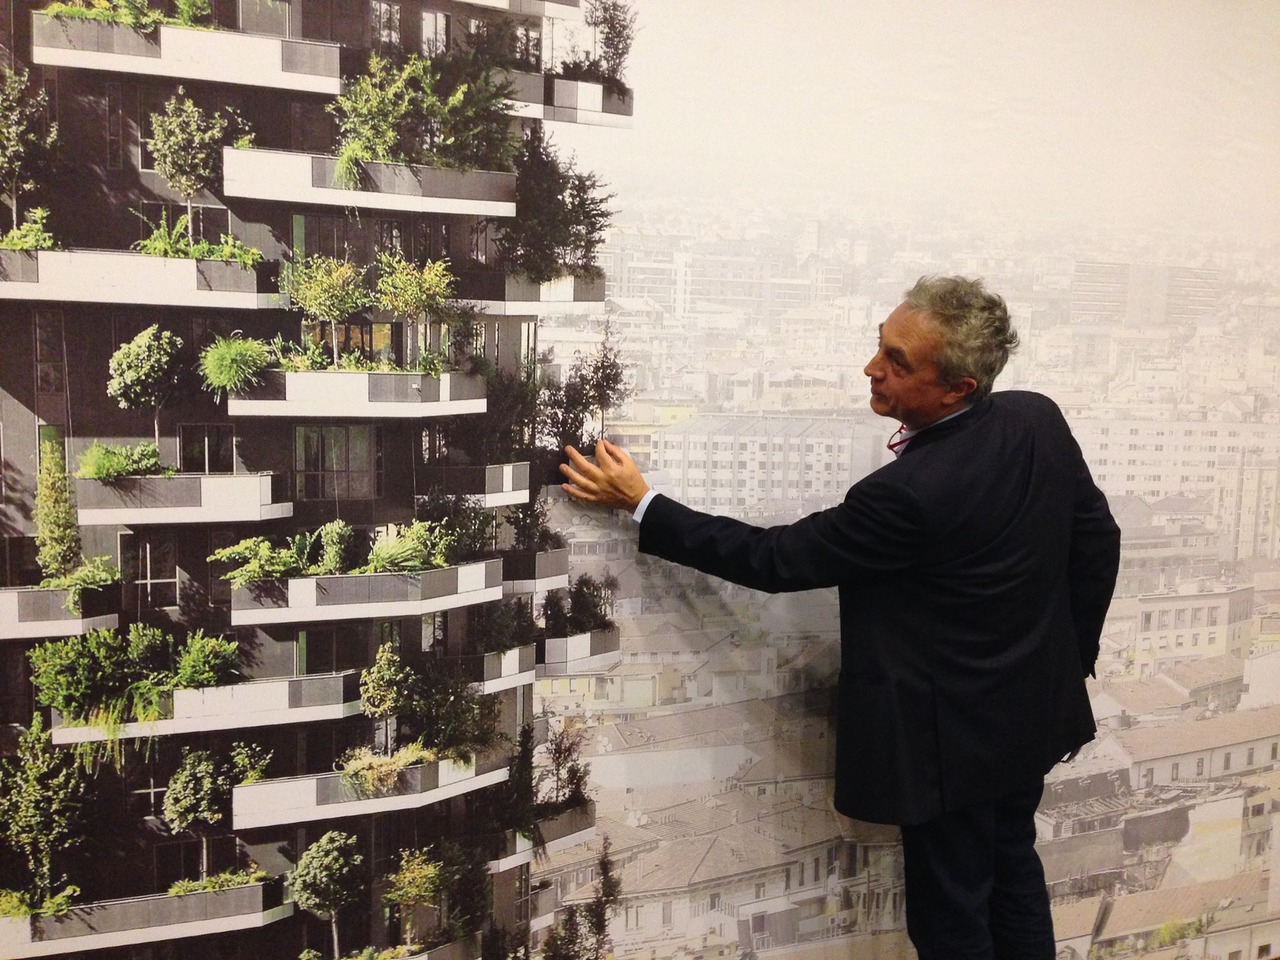 The Bosco Verticale is the world's most beautiful tall building